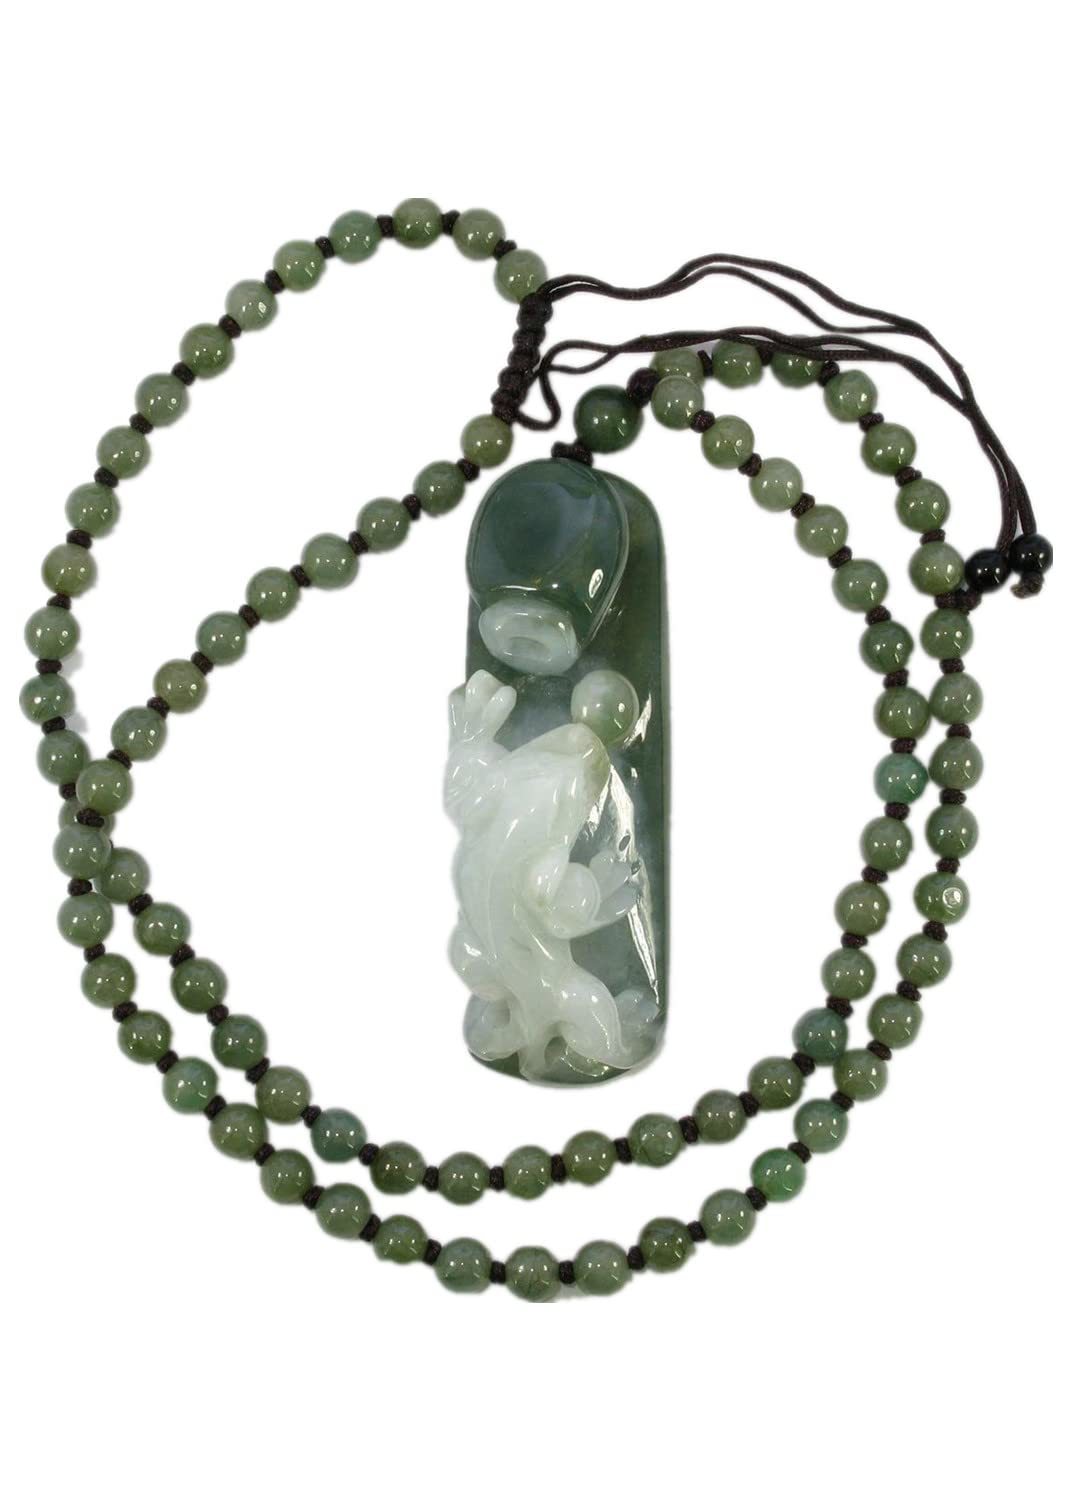 Primary image for 2.4"China Certified Grade A Nature Hisui Jadeite Jade Fortune Pixiu and Basket N